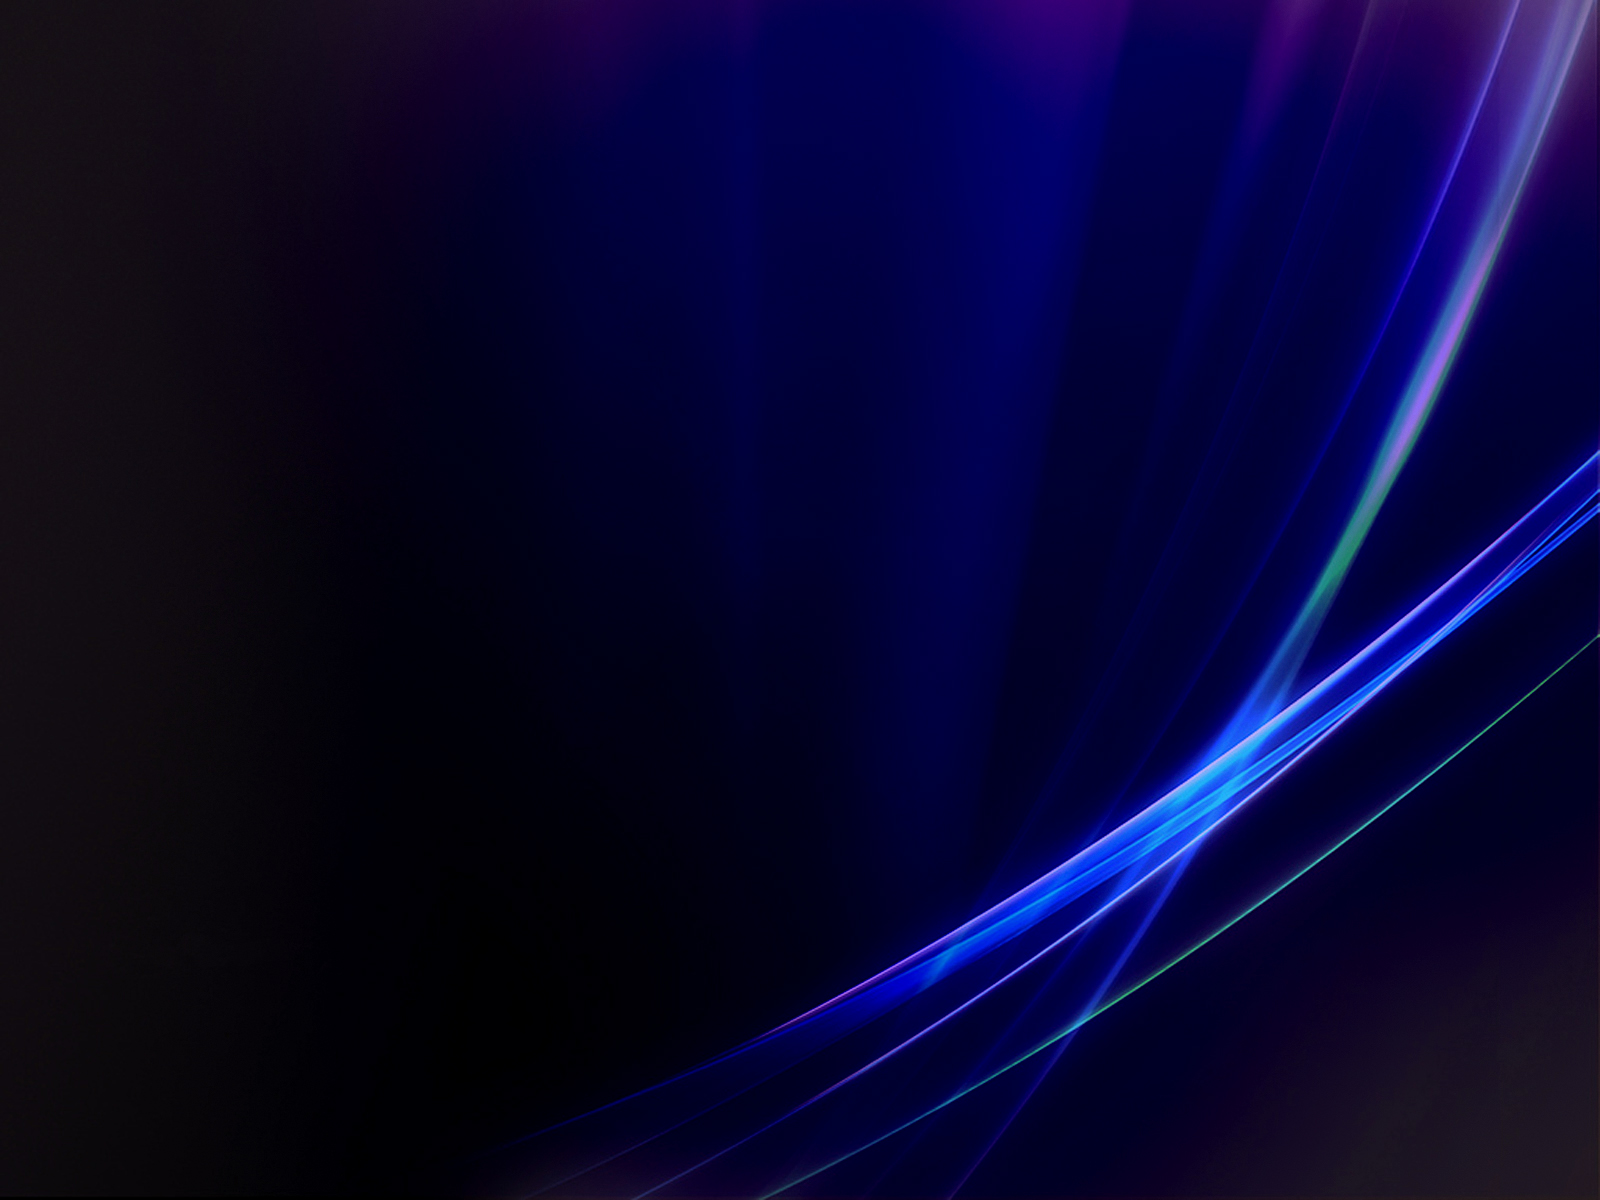  Neon Blue Wallpaper By Necronomycon Dark Blues Purples And8230